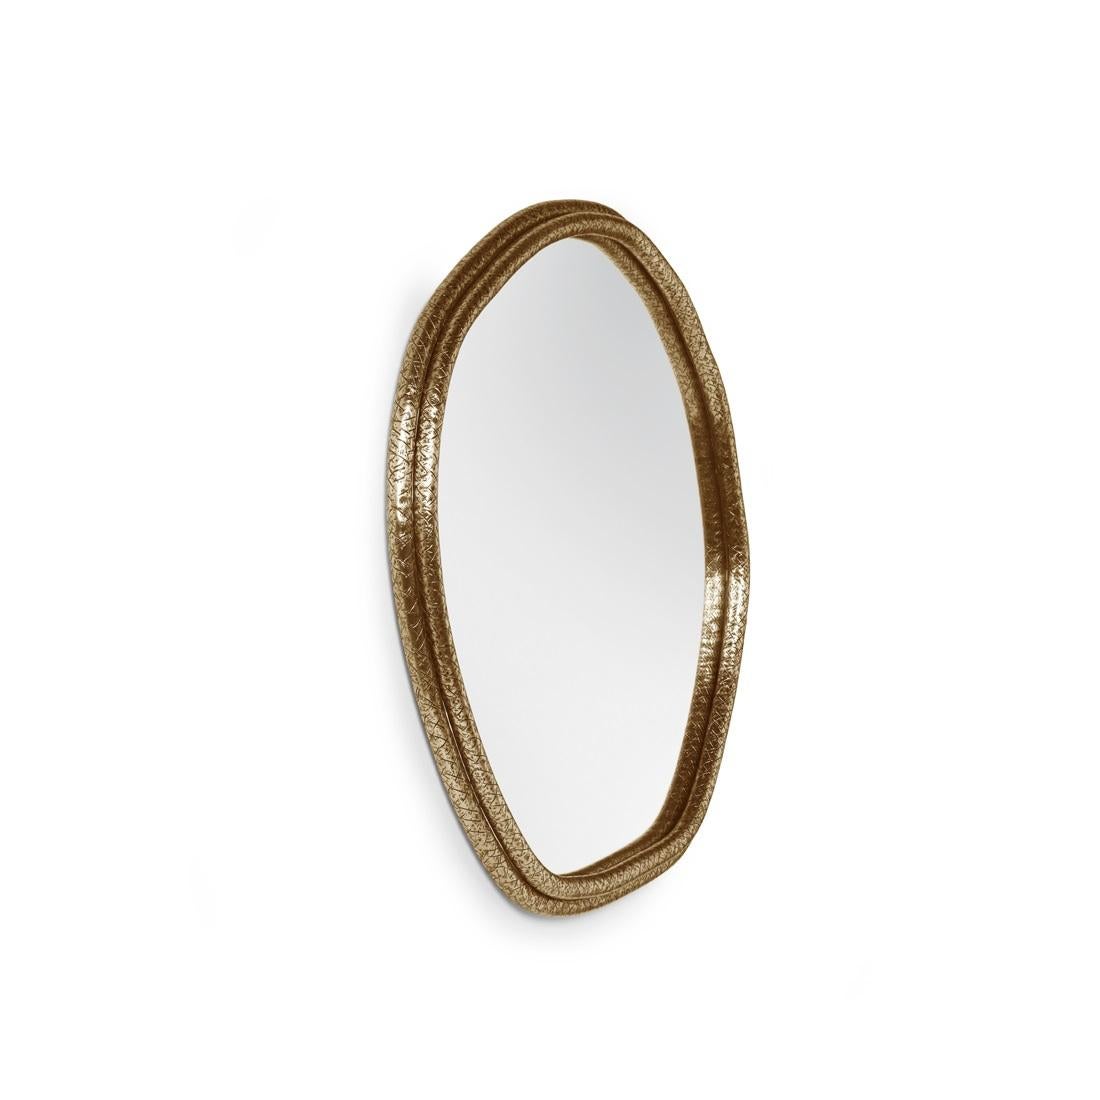 The arches of this mirror are hand hammered in brass, shaped around a tree trunk. The mirror here represents time as a flat quasi-elliptical shape, therefore everlasting..
Frame: Brass, Nickel or Copper in jagged hammered finishing.
Mirror: Clear,